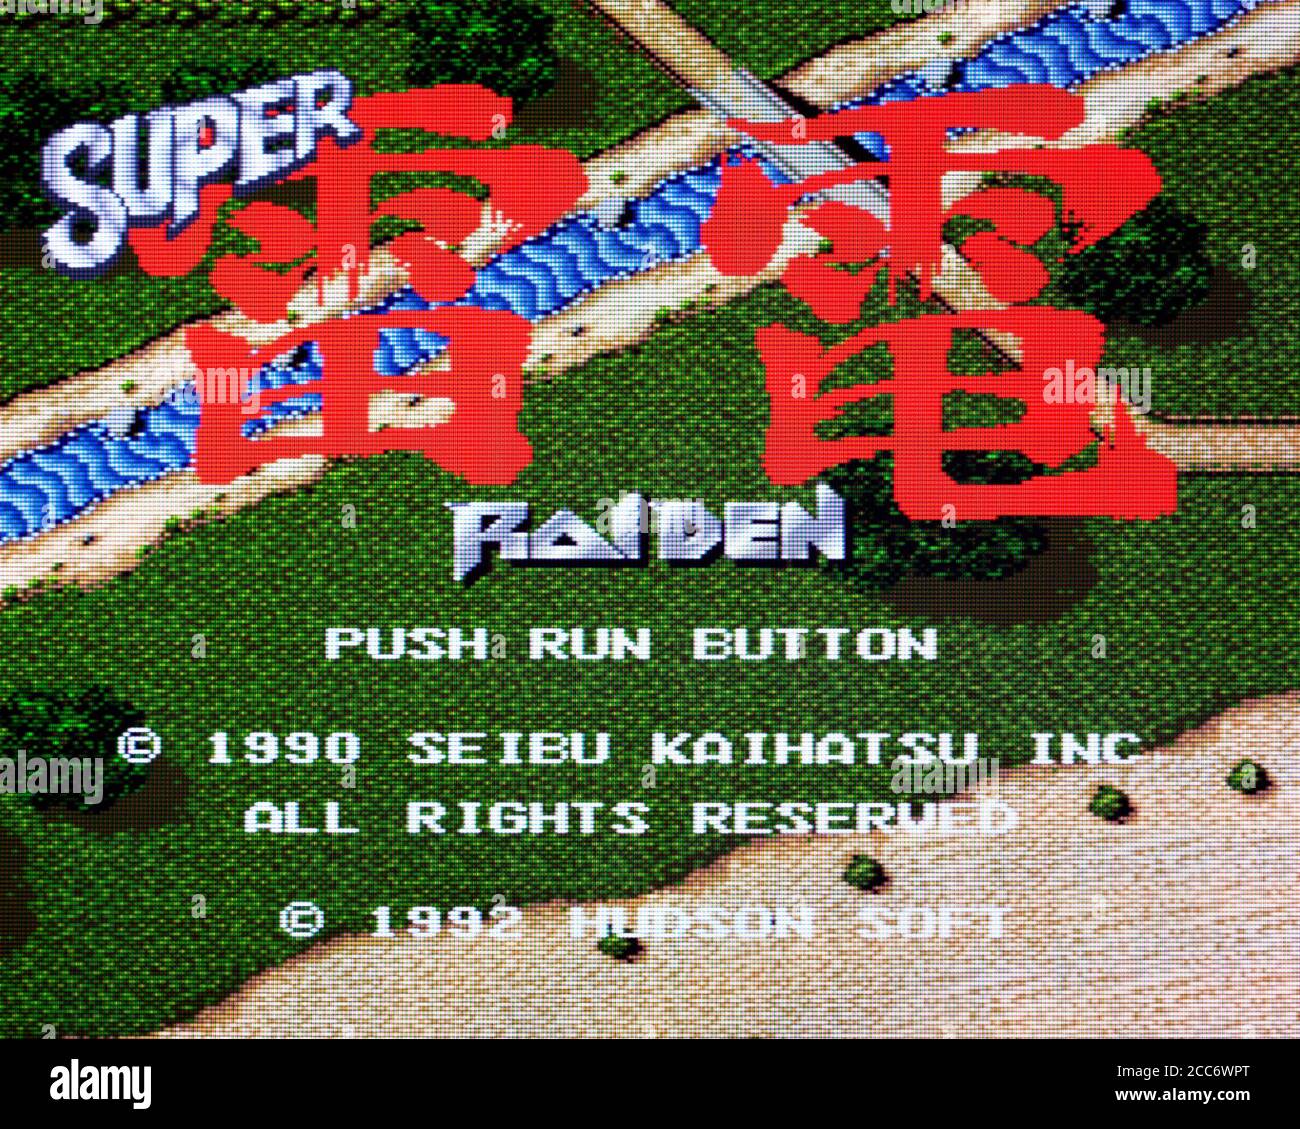 Super Raiden - PC Engine CD Videogame - Editorial use only Stock Photo